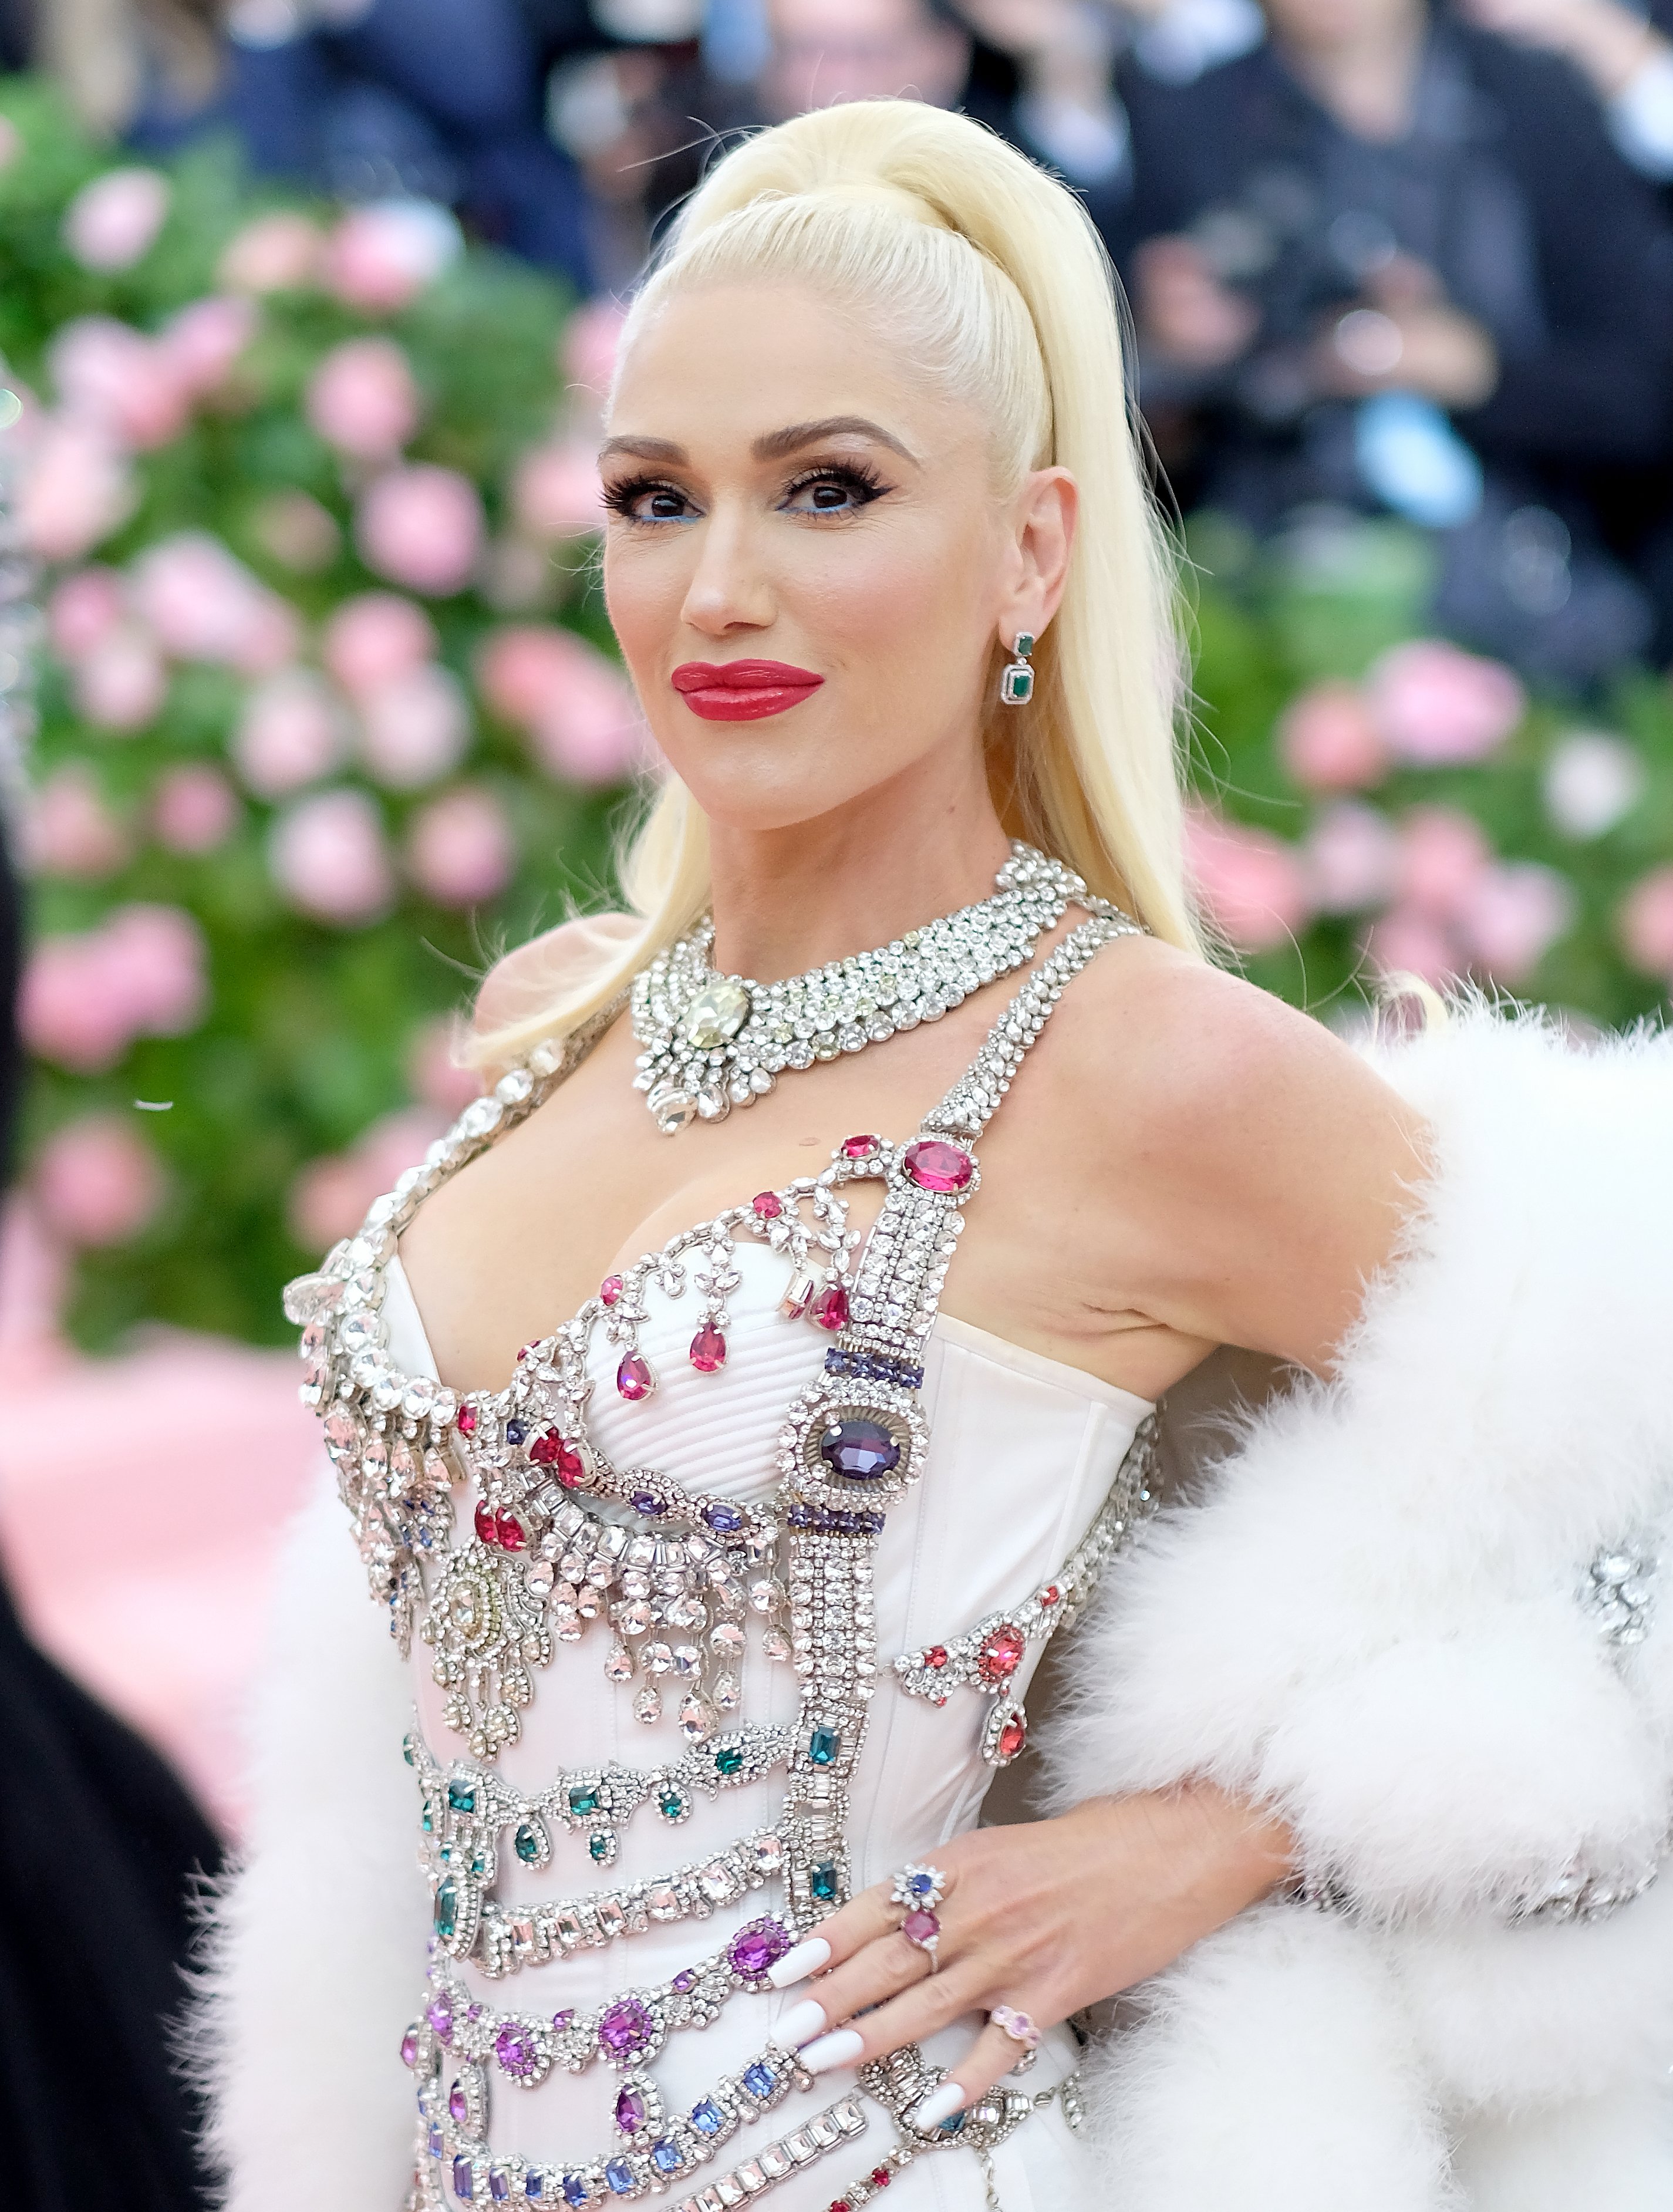 Gwen Stefani attends the Met Gala Celebrating Camp in New York City on May 6, 2019 | Photo: Getty Images